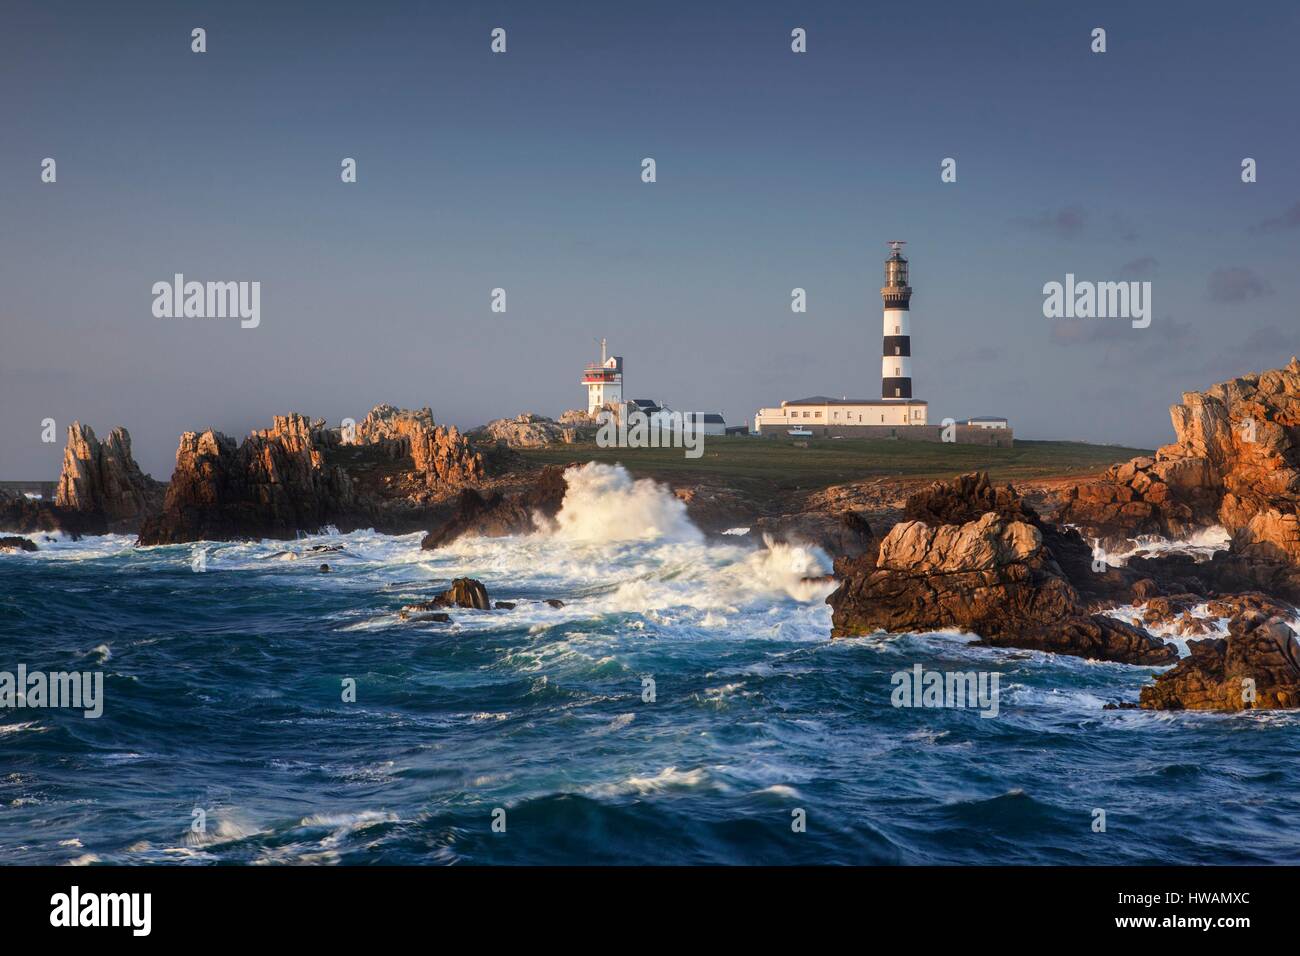 France, Finistere, Ushant, Pointe Creac'h, Biosphere Reserve, Regional Natural Park of Brittany, Ile du Ponant, advanced Creac'h, classified as Histor Stock Photo